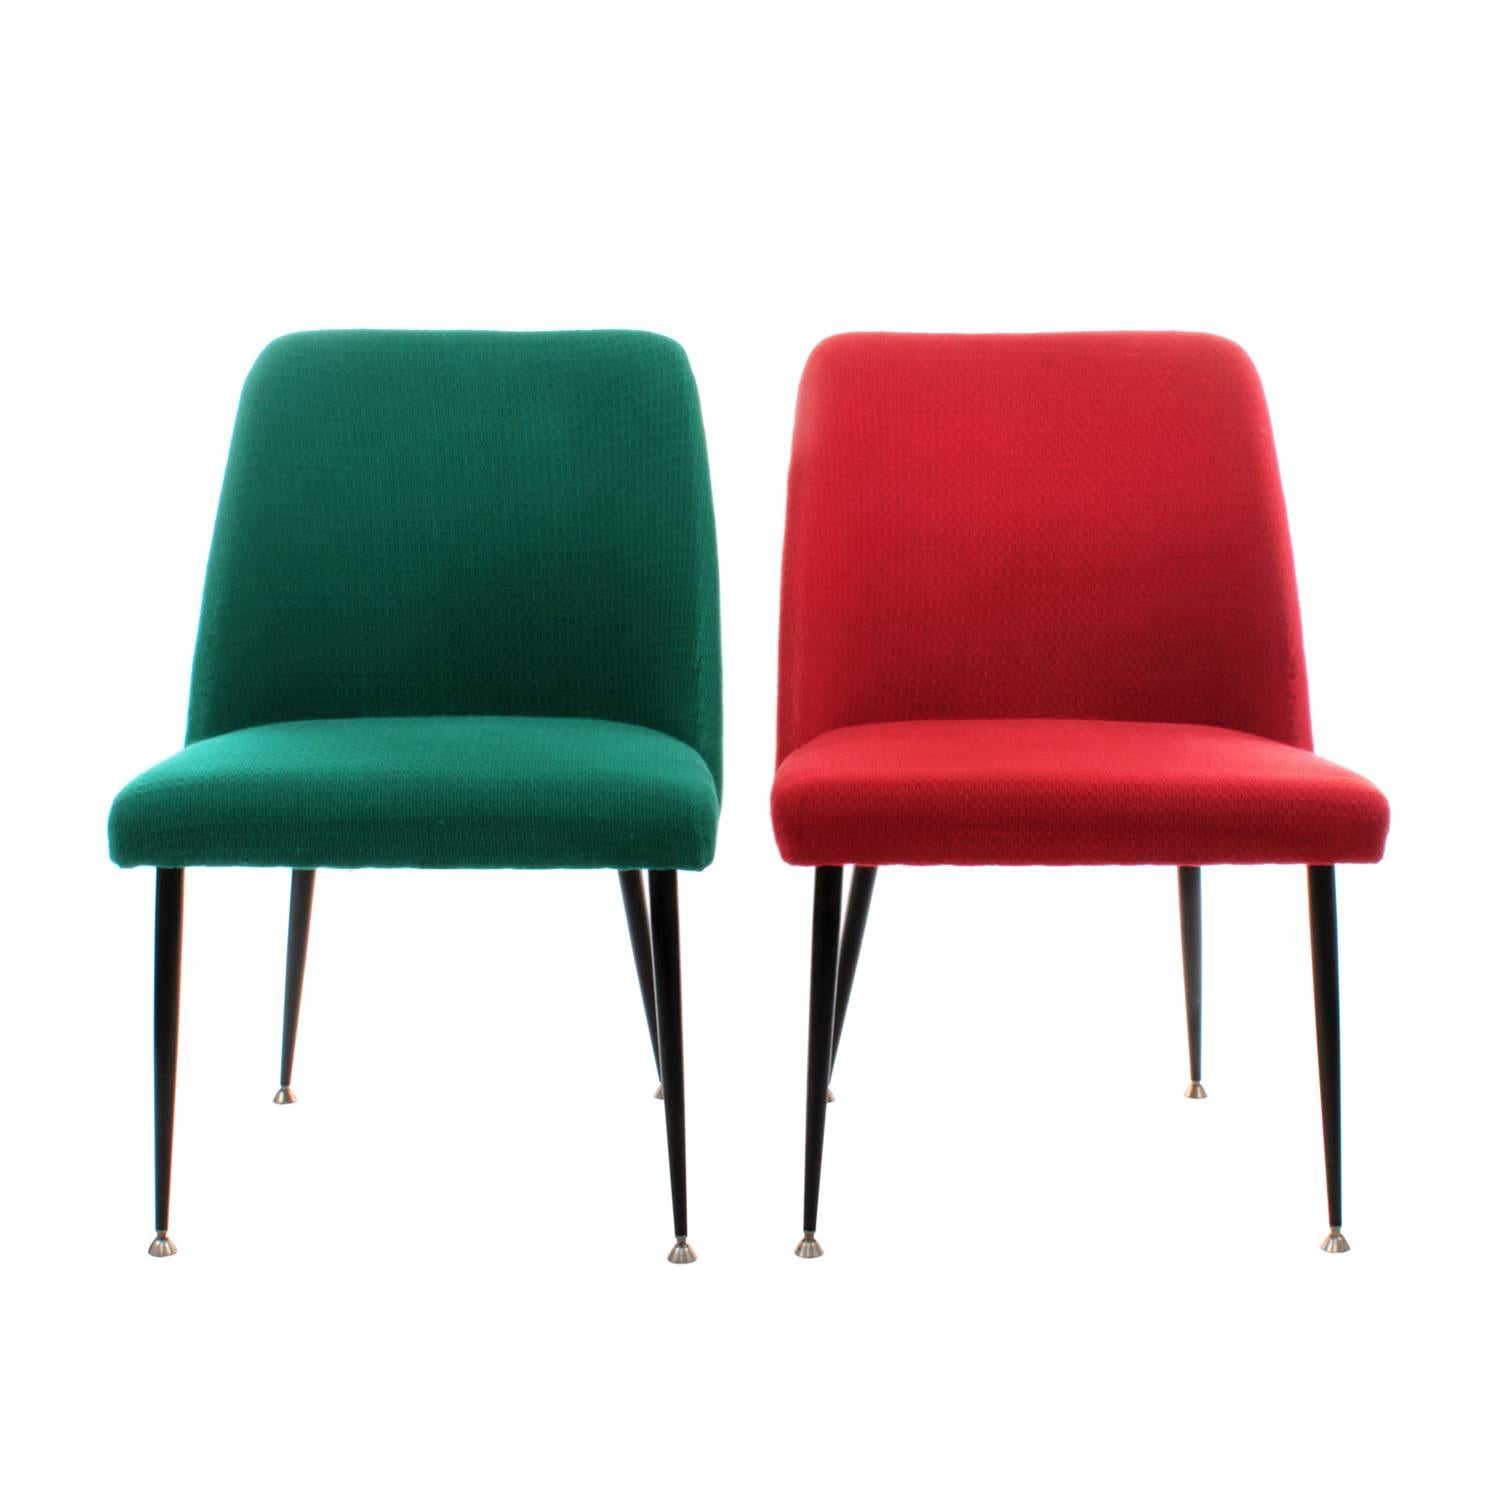 Pair of chairs - stylish pair of 1950s accent chairs by unknown producer - beautiful set of midcentury Danish chairs in teal green and dusty red.

A pair of slipper chairs with woven fabric upholstery and tapered black lacquered legs with metal